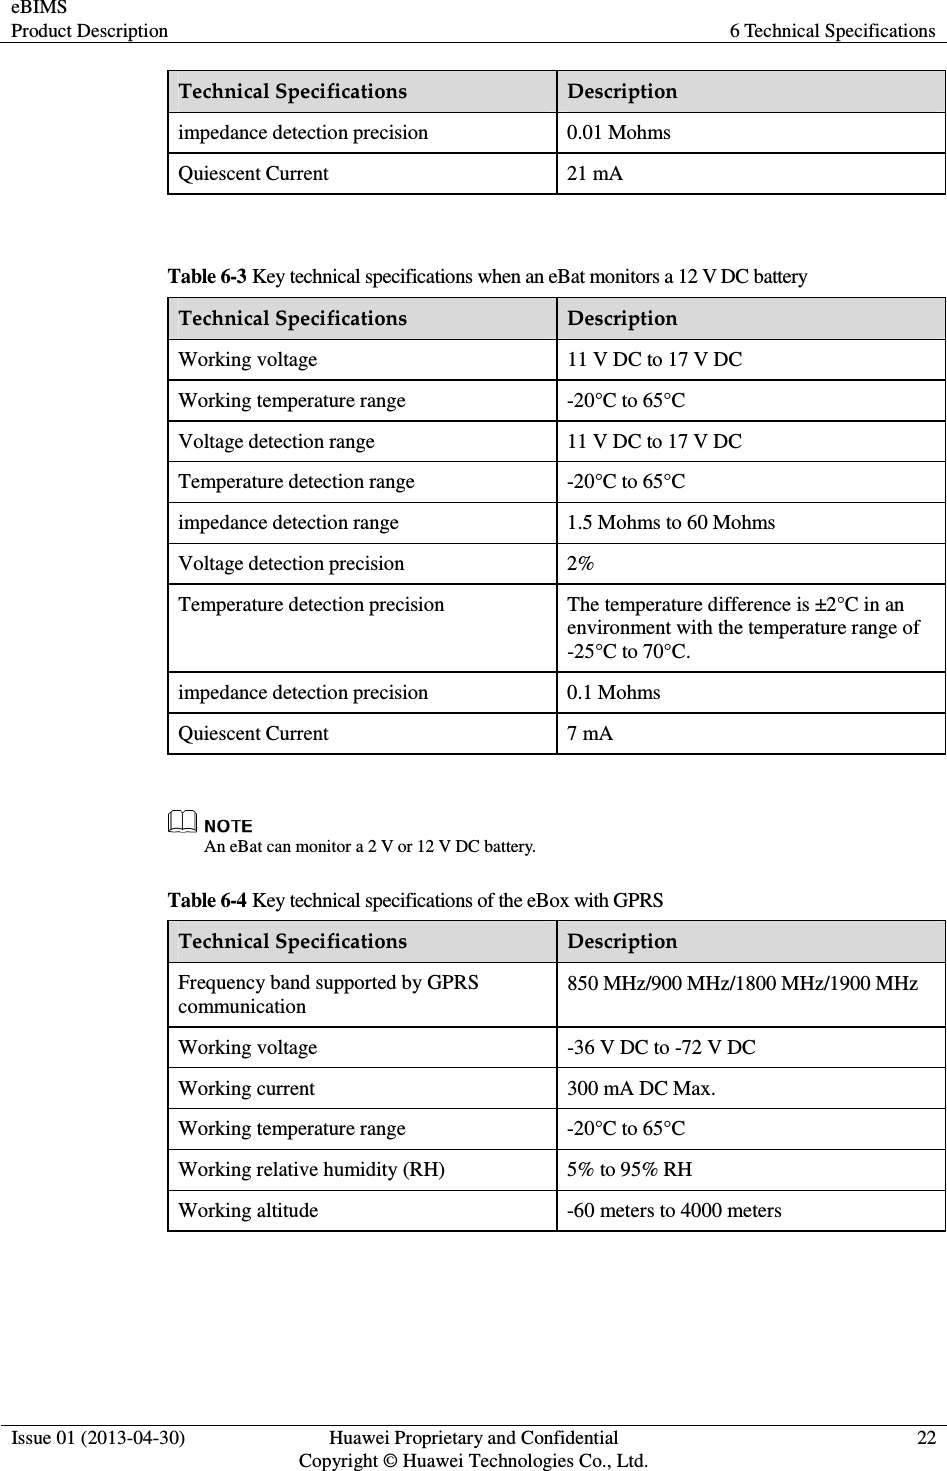 eBIMS Product Description  6 Technical Specifications  Issue 01 (2013-04-30)  Huawei Proprietary and Confidential                                     Copyright © Huawei Technologies Co., Ltd. 22  Technical Specifications  Description impedance detection precision  0.01 Mohms Quiescent Current  21 mA  Table 6-3 Key technical specifications when an eBat monitors a 12 V DC battery Technical Specifications  Description Working voltage  11 V DC to 17 V DC Working temperature range  -20°C to 65°C Voltage detection range  11 V DC to 17 V DC Temperature detection range  -20°C to 65°C impedance detection range  1.5 Mohms to 60 Mohms Voltage detection precision  2% Temperature detection precision  The temperature difference is ±2°C in an environment with the temperature range of -25°C to 70°C. impedance detection precision  0.1 Mohms Quiescent Current  7 mA   An eBat can monitor a 2 V or 12 V DC battery. Table 6-4 Key technical specifications of the eBox with GPRS Technical Specifications  Description Frequency band supported by GPRS communication 850 MHz/900 MHz/1800 MHz/1900 MHz Working voltage  -36 V DC to -72 V DC Working current  300 mA DC Max. Working temperature range  -20°C to 65°C Working relative humidity (RH)  5% to 95% RH Working altitude  -60 meters to 4000 meters  